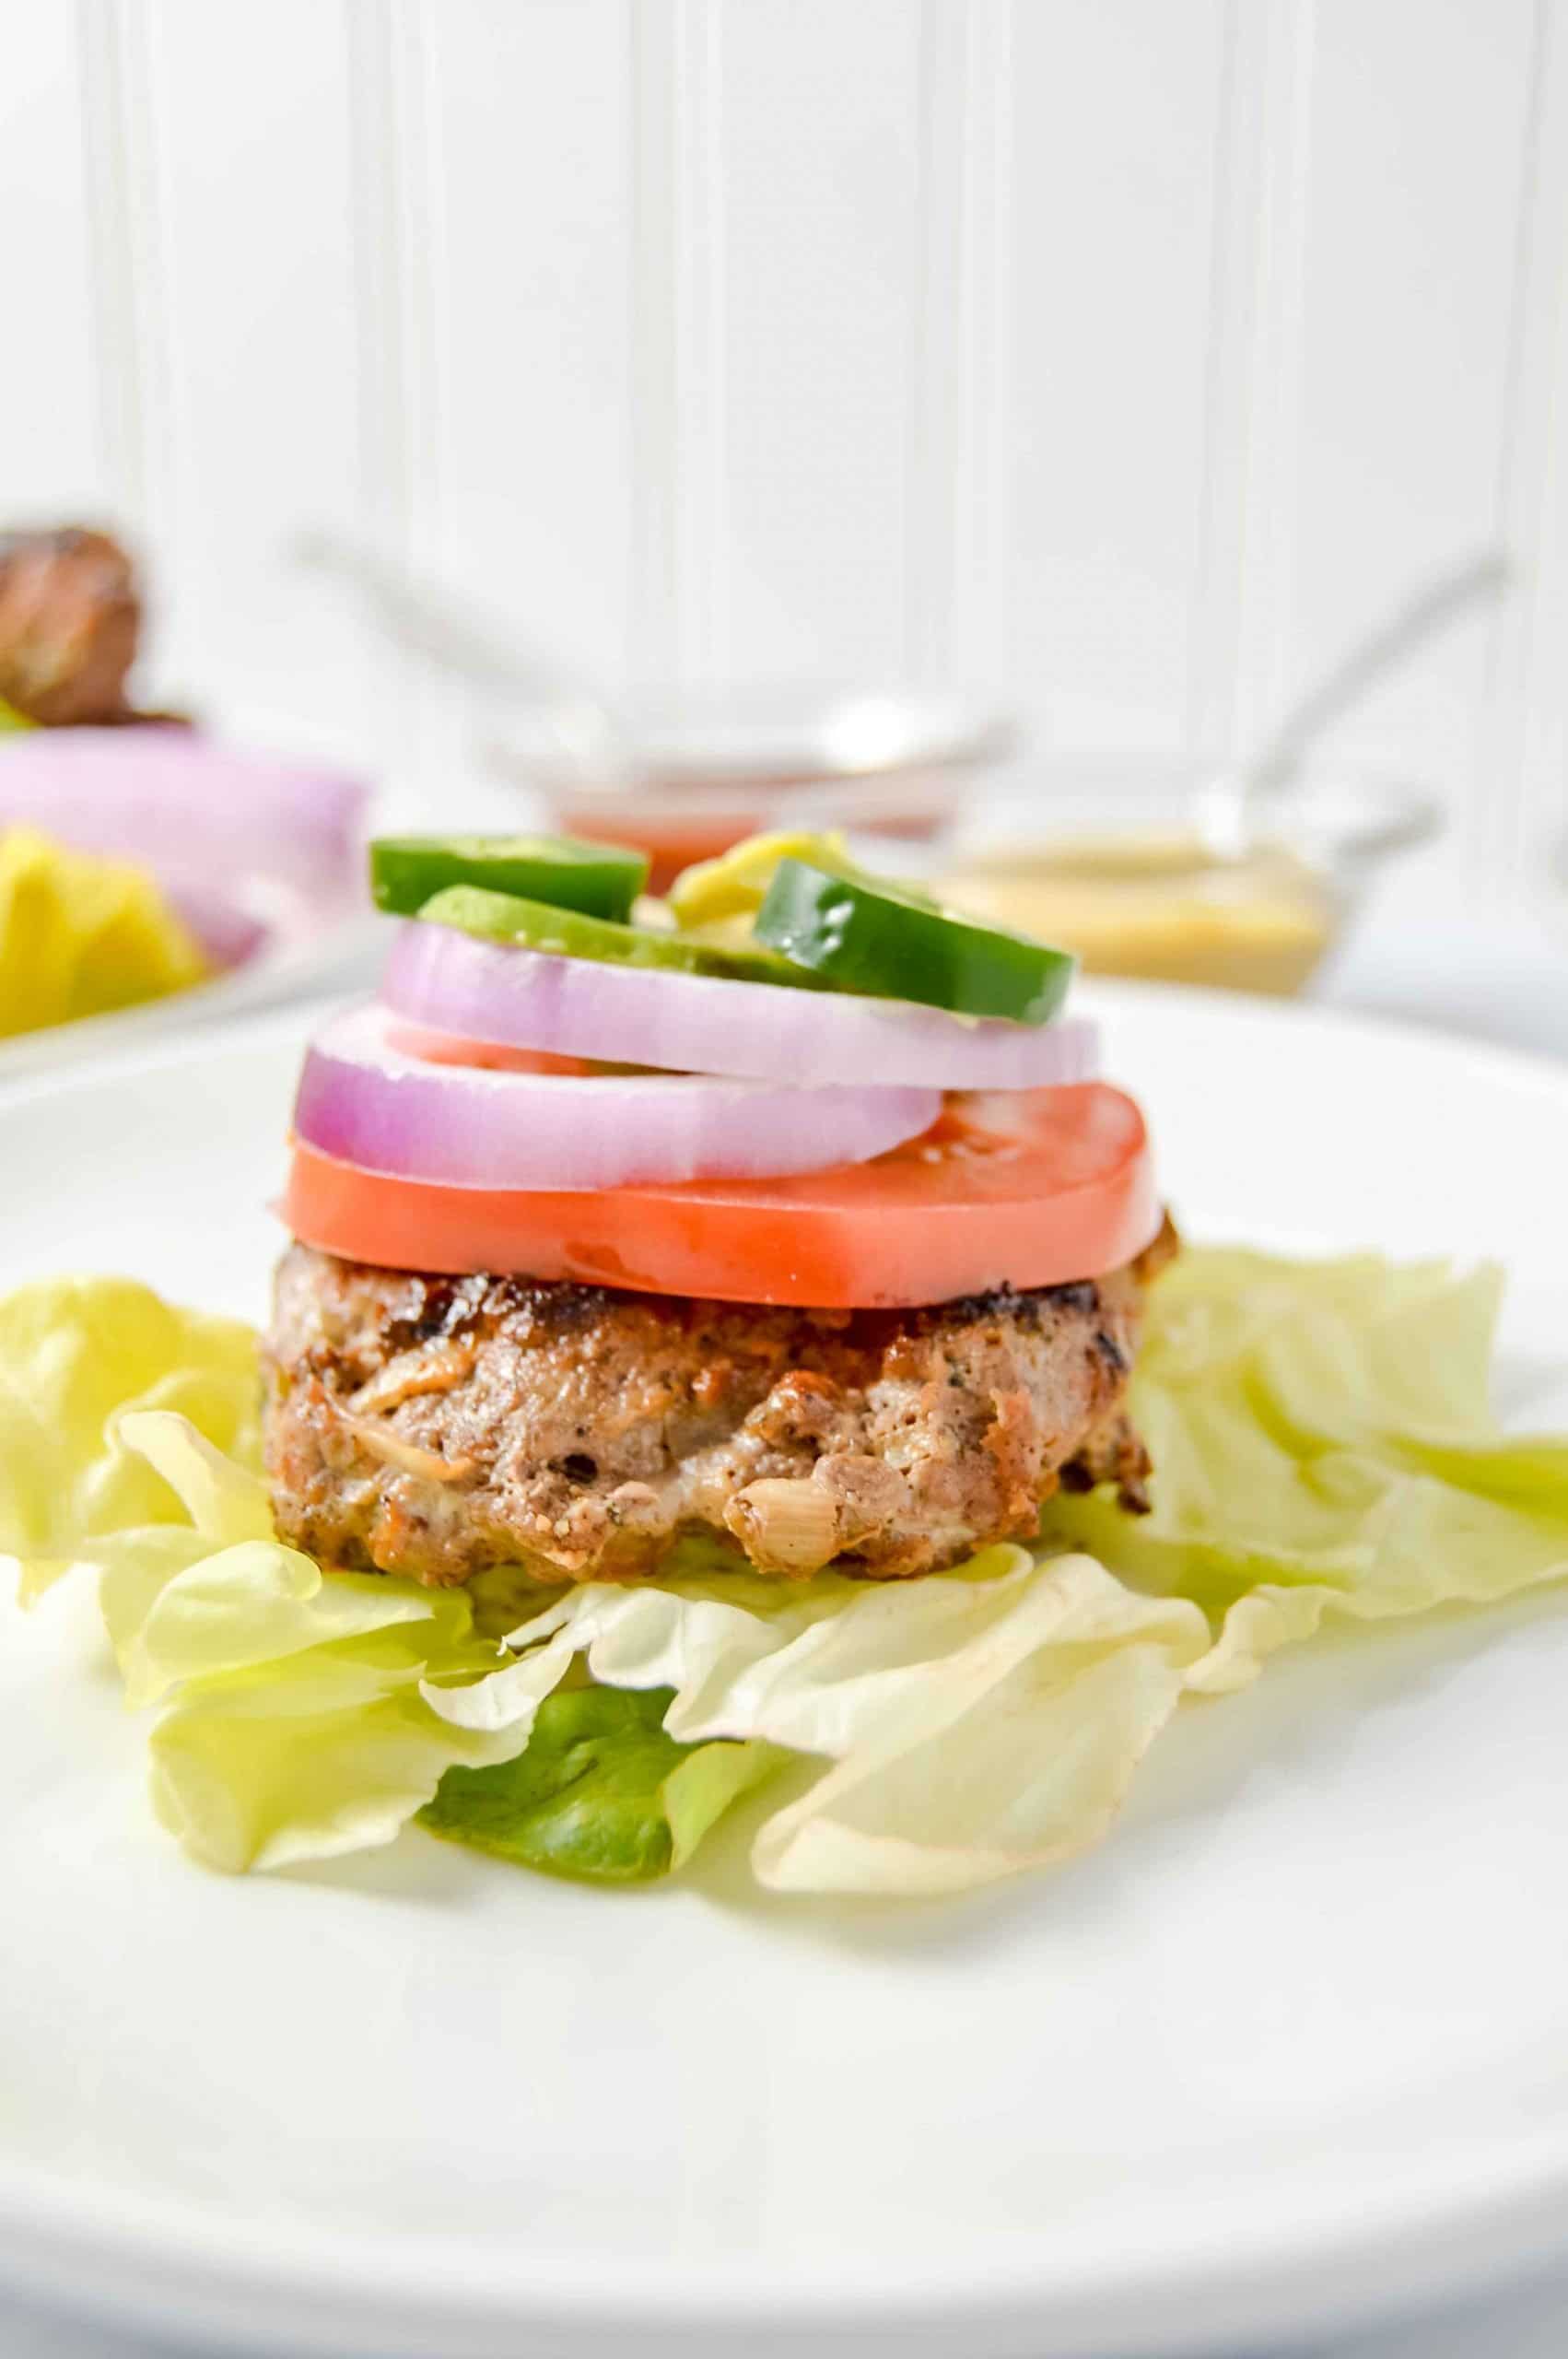 Image is a side view of a Ranch burger on top a bed of lettuce with a round white plate. Atop the burger red onion, tomato, mustard, ketchup, jalapeño and avocado. There is a bowl of mustard and a bowl of ketchup above the plate. Next to it is a cut off plate with burger and red onion. www.atwistedplate.com/savory-ranch-burger/